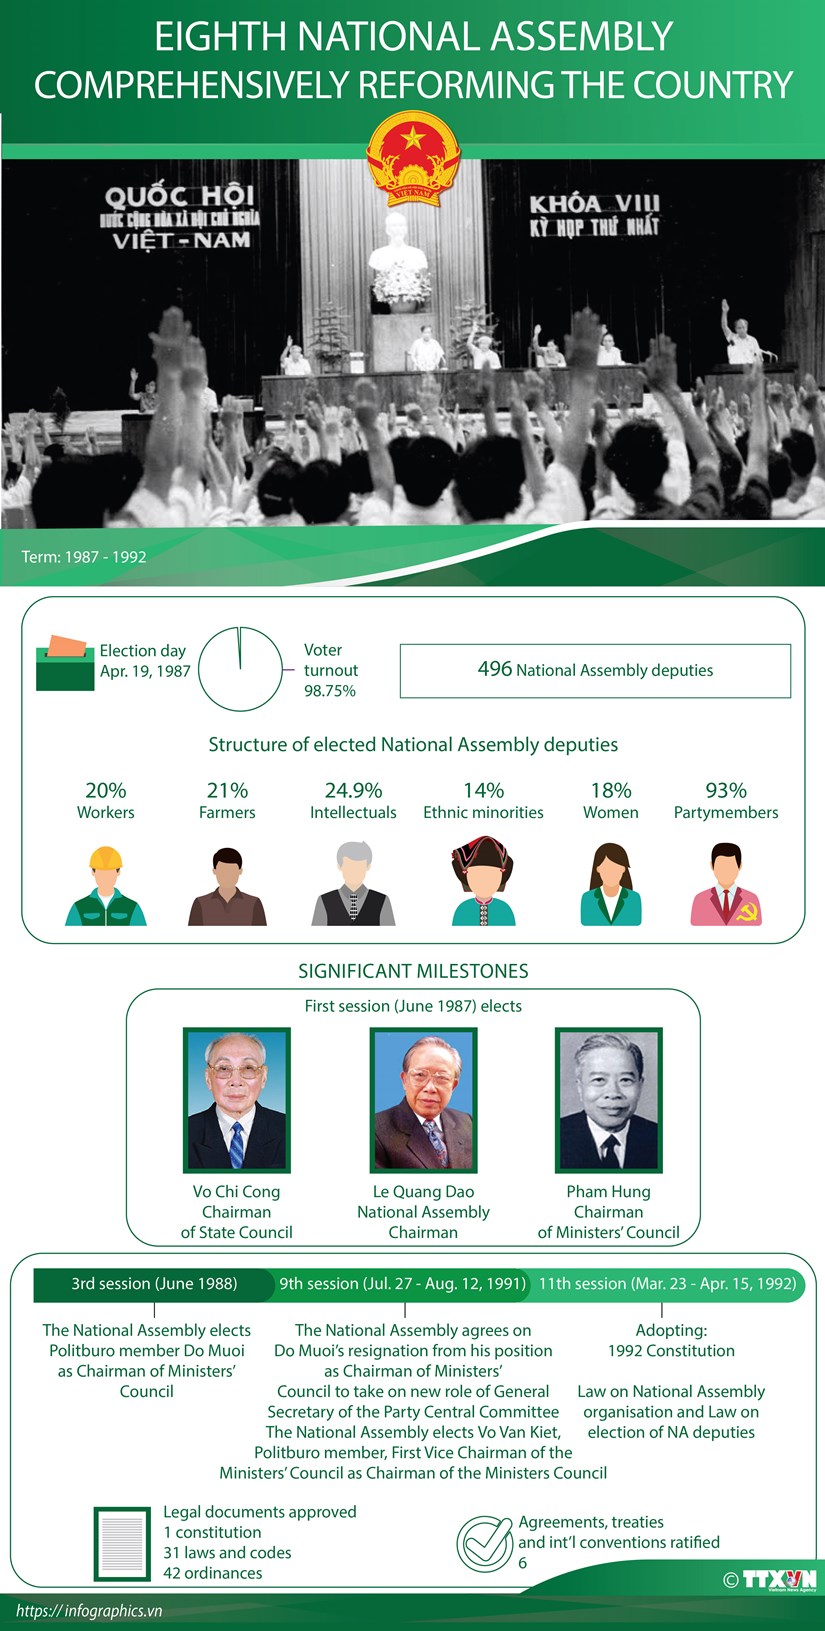 Eighth National Assembly: Comprehensively reforming the country hinh anh 1